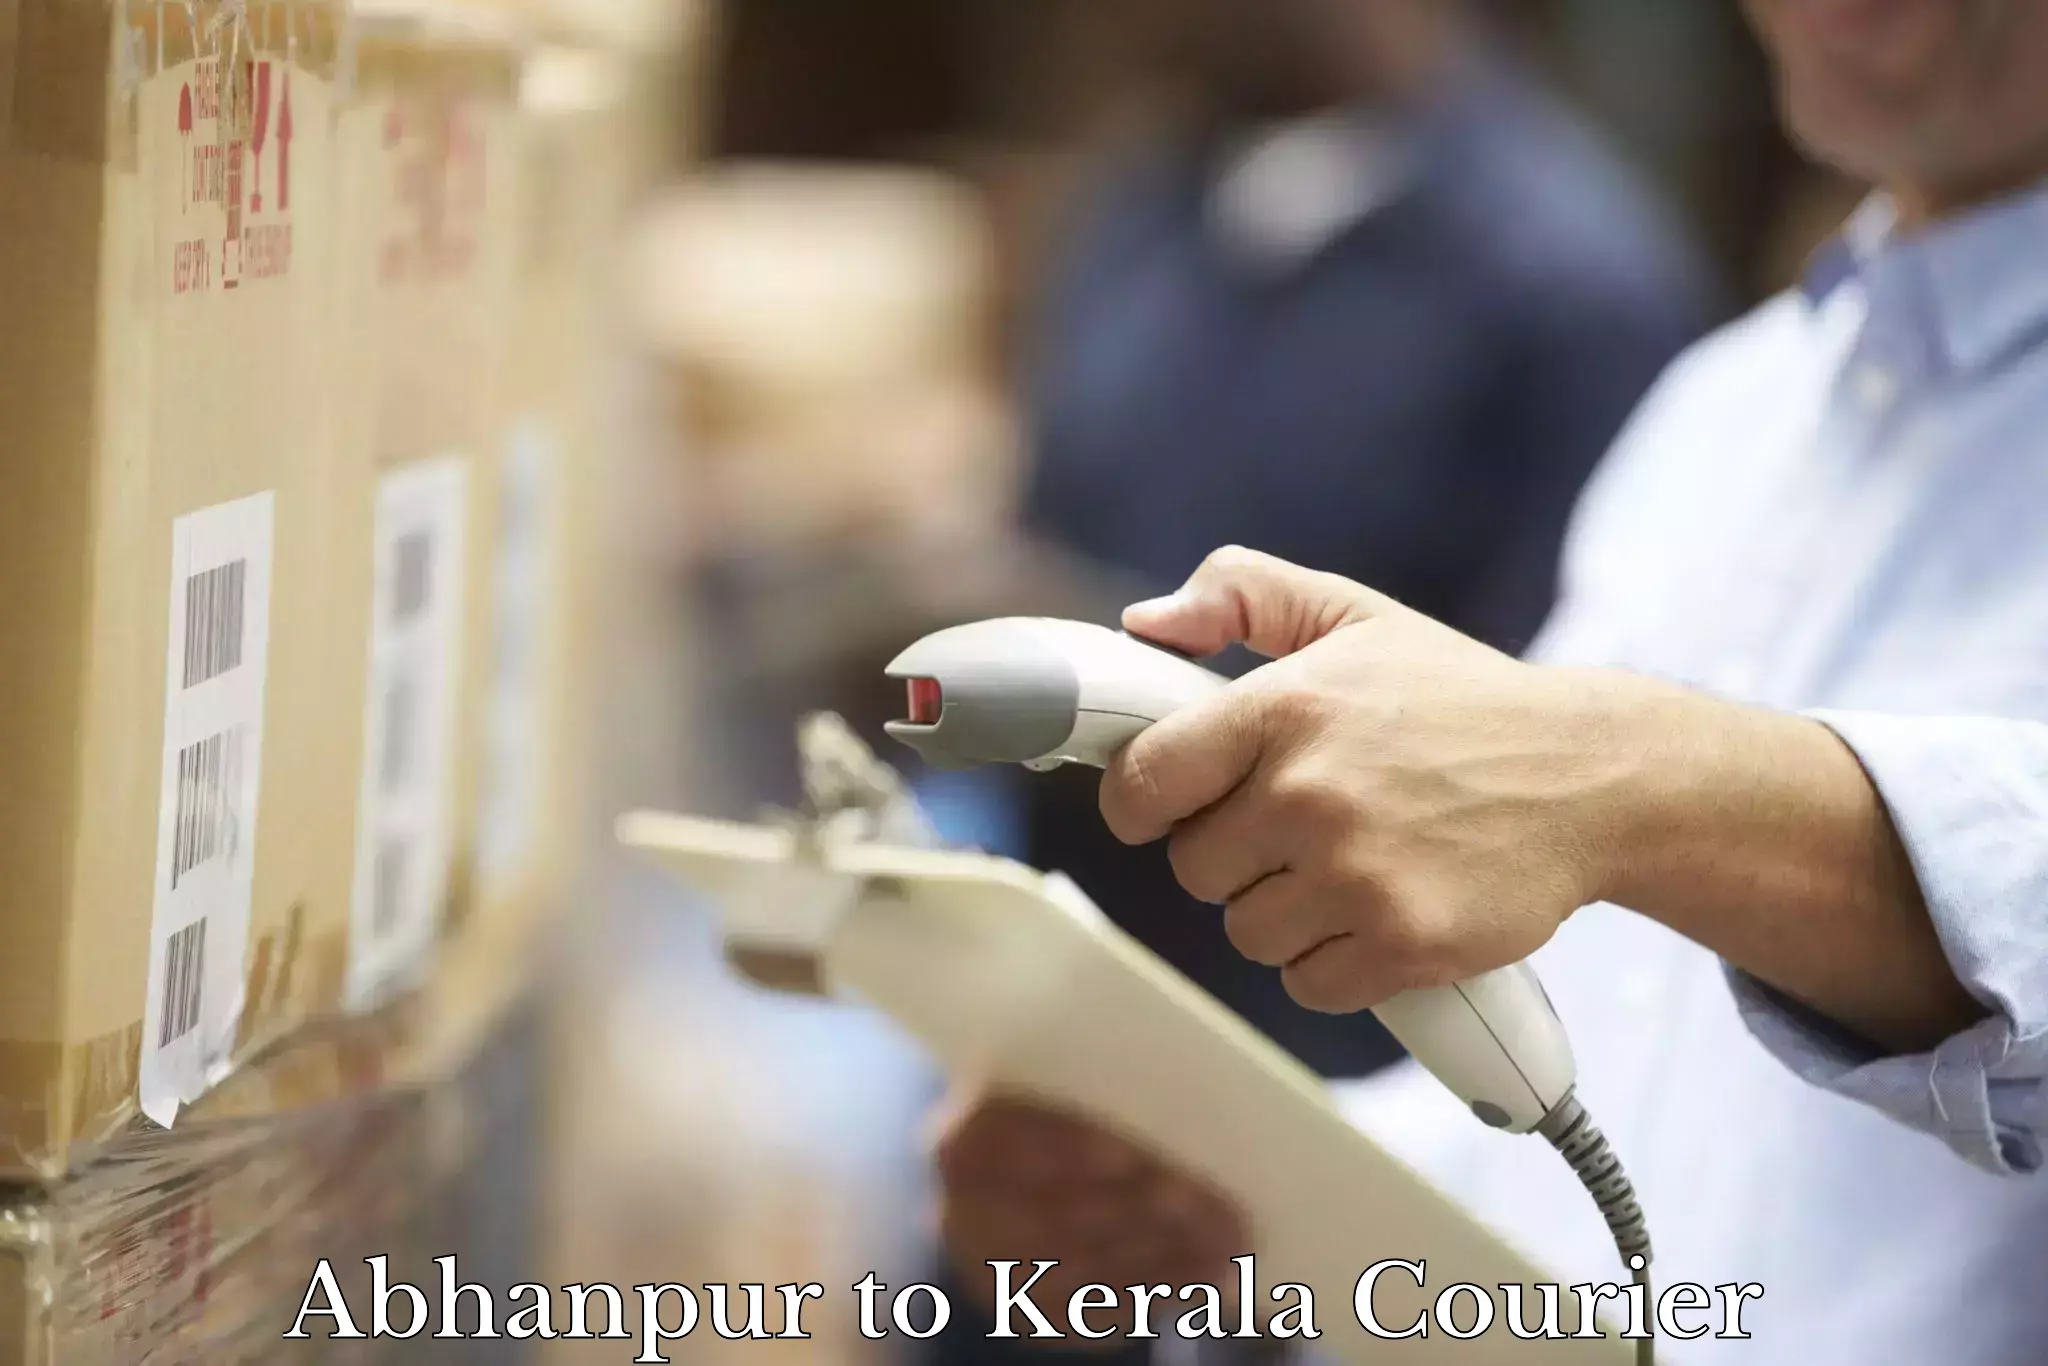 Next-day delivery options Abhanpur to Kerala